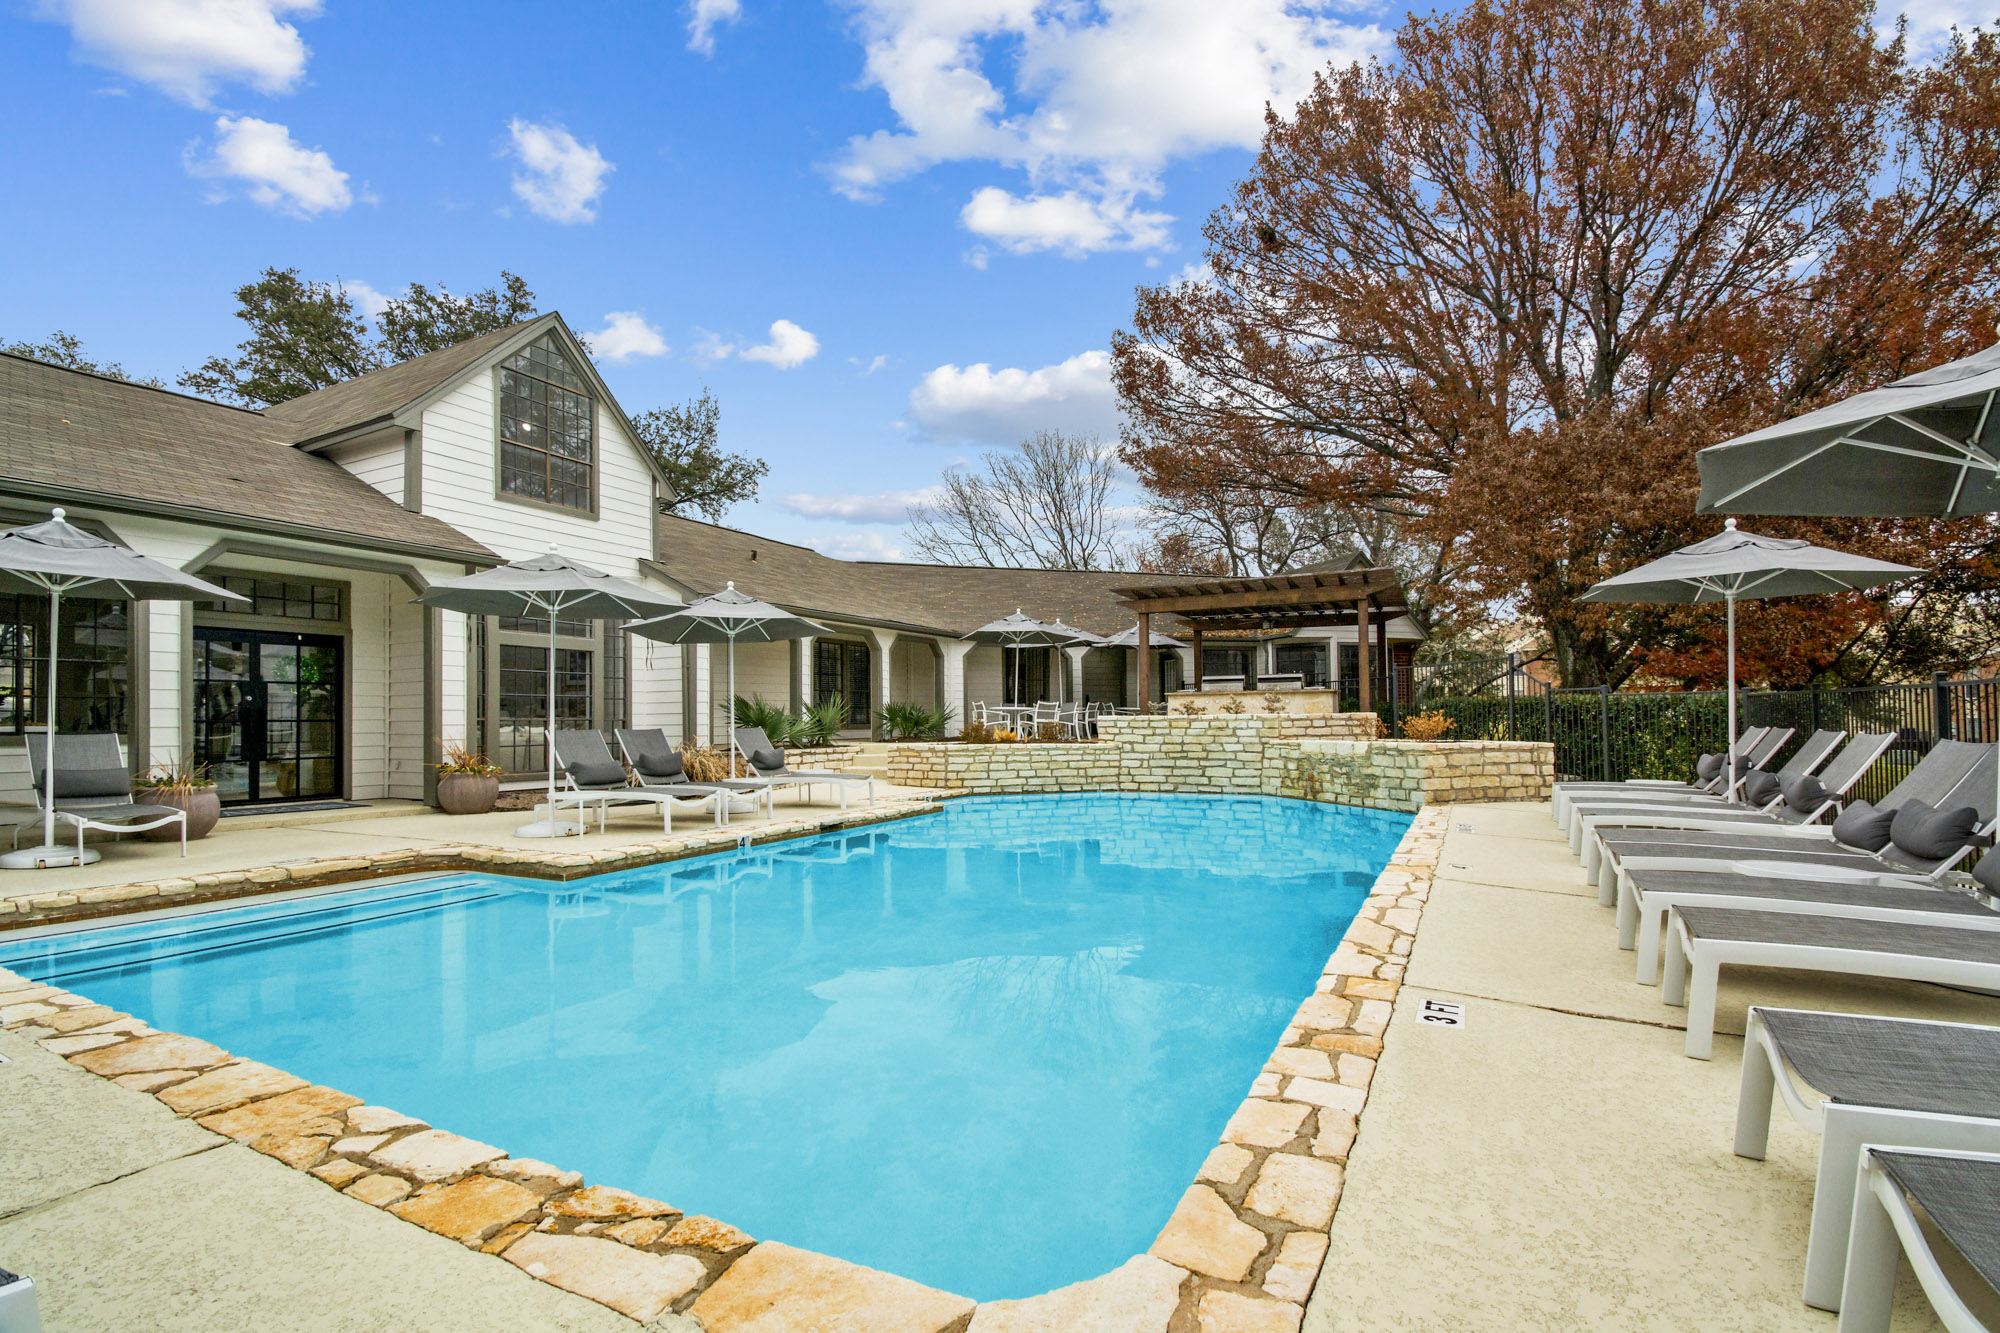 The pool at The Arbors of Wells Branch in Austin, Texas.